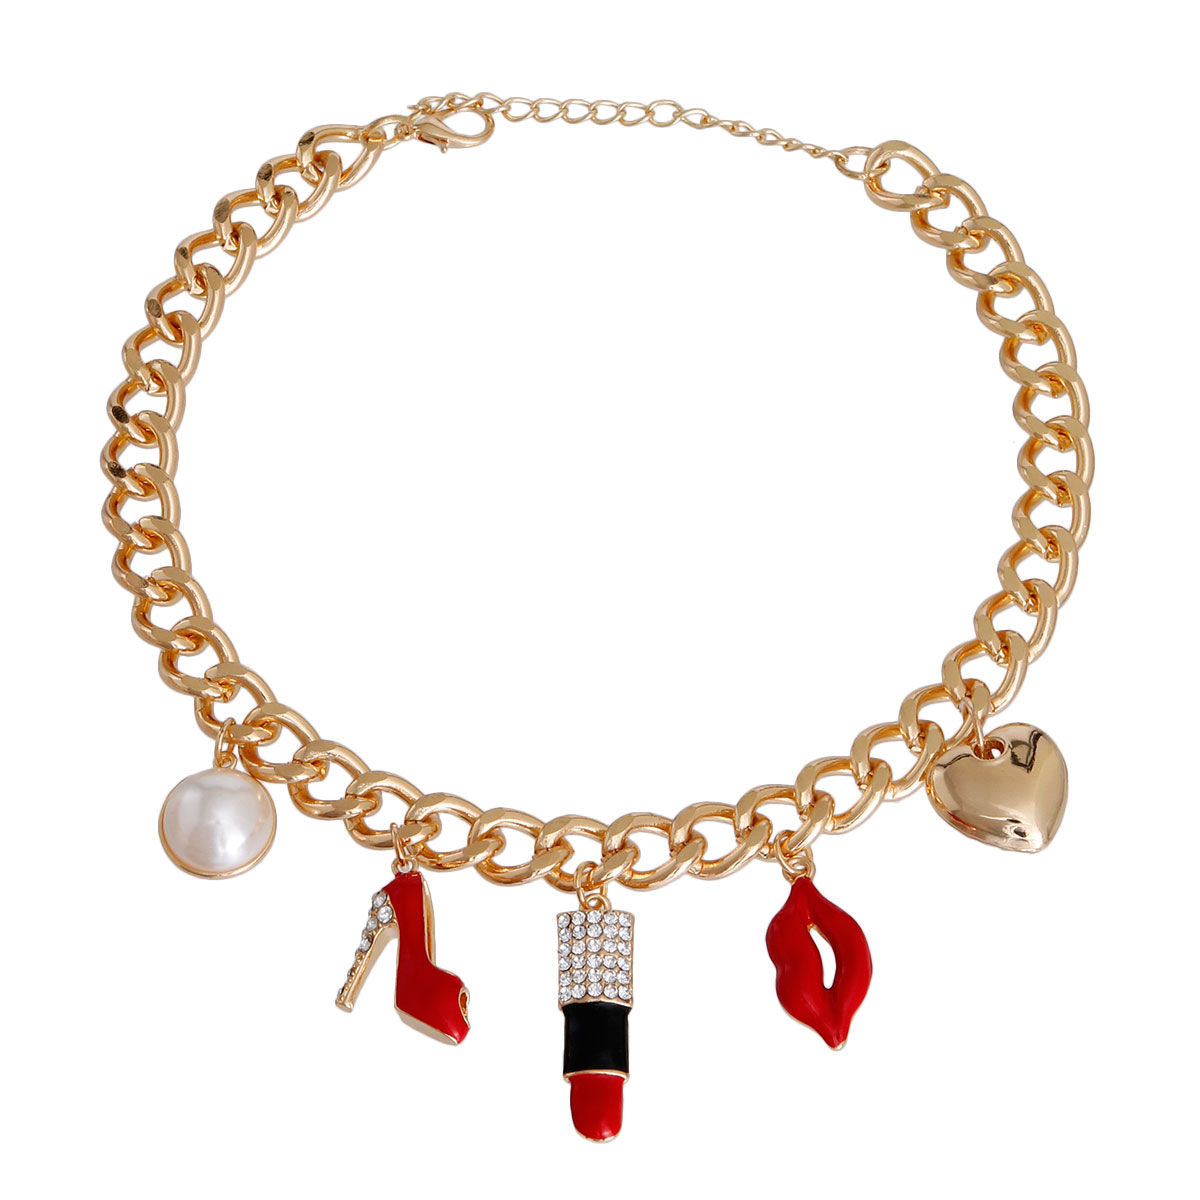 Gold and Red Boutique Charm Chain